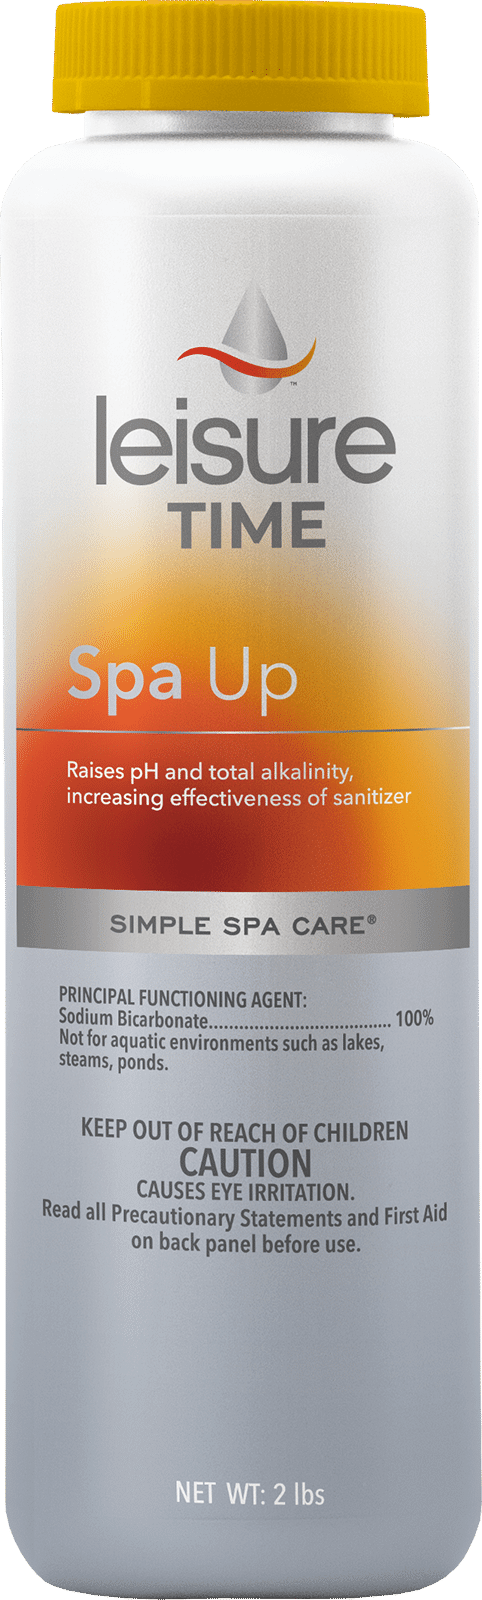 Leisure Time Spa Up, 2 LBS. - 22339A